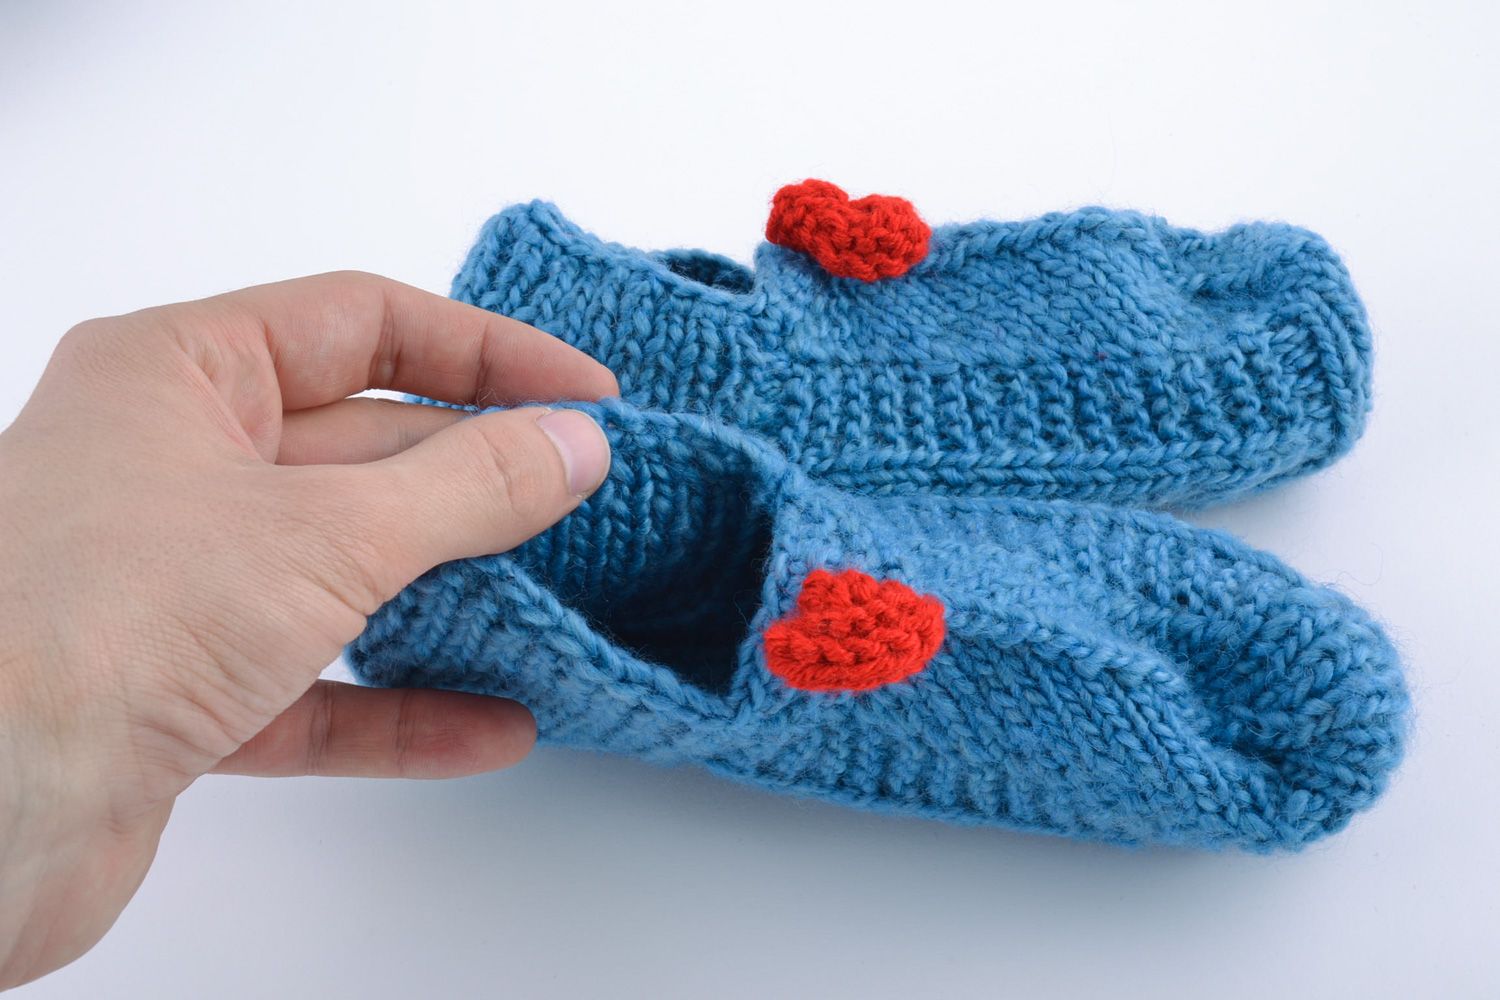 Handmade warm knitted half-woolen women's slippers of blue color with red knitted accessories photo 5